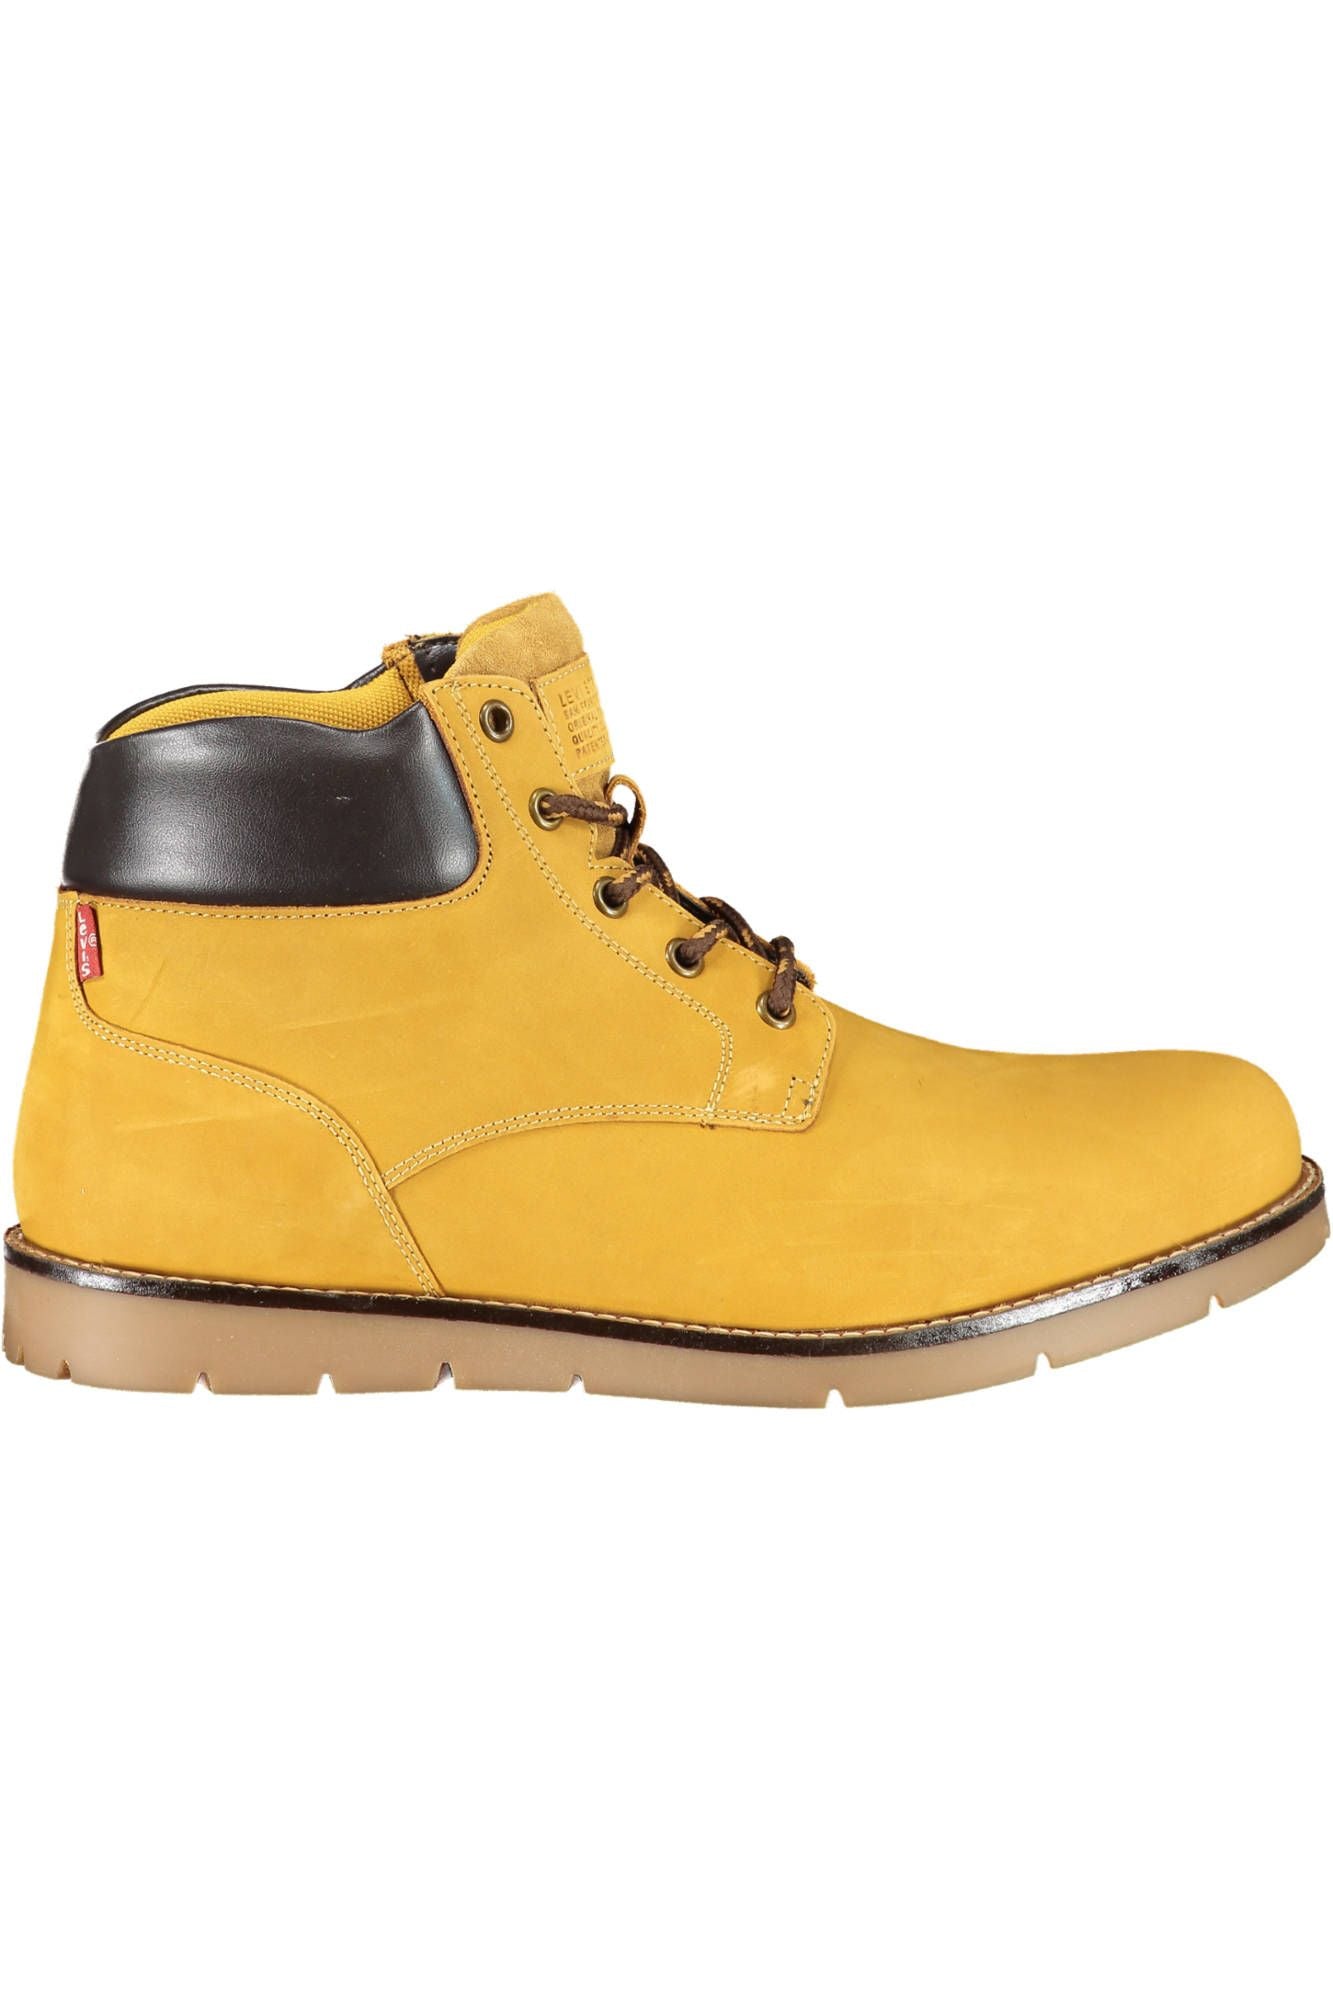 Sunset Yellow Ankle Boots with Lace-Up Detail - Divitiae Glamour